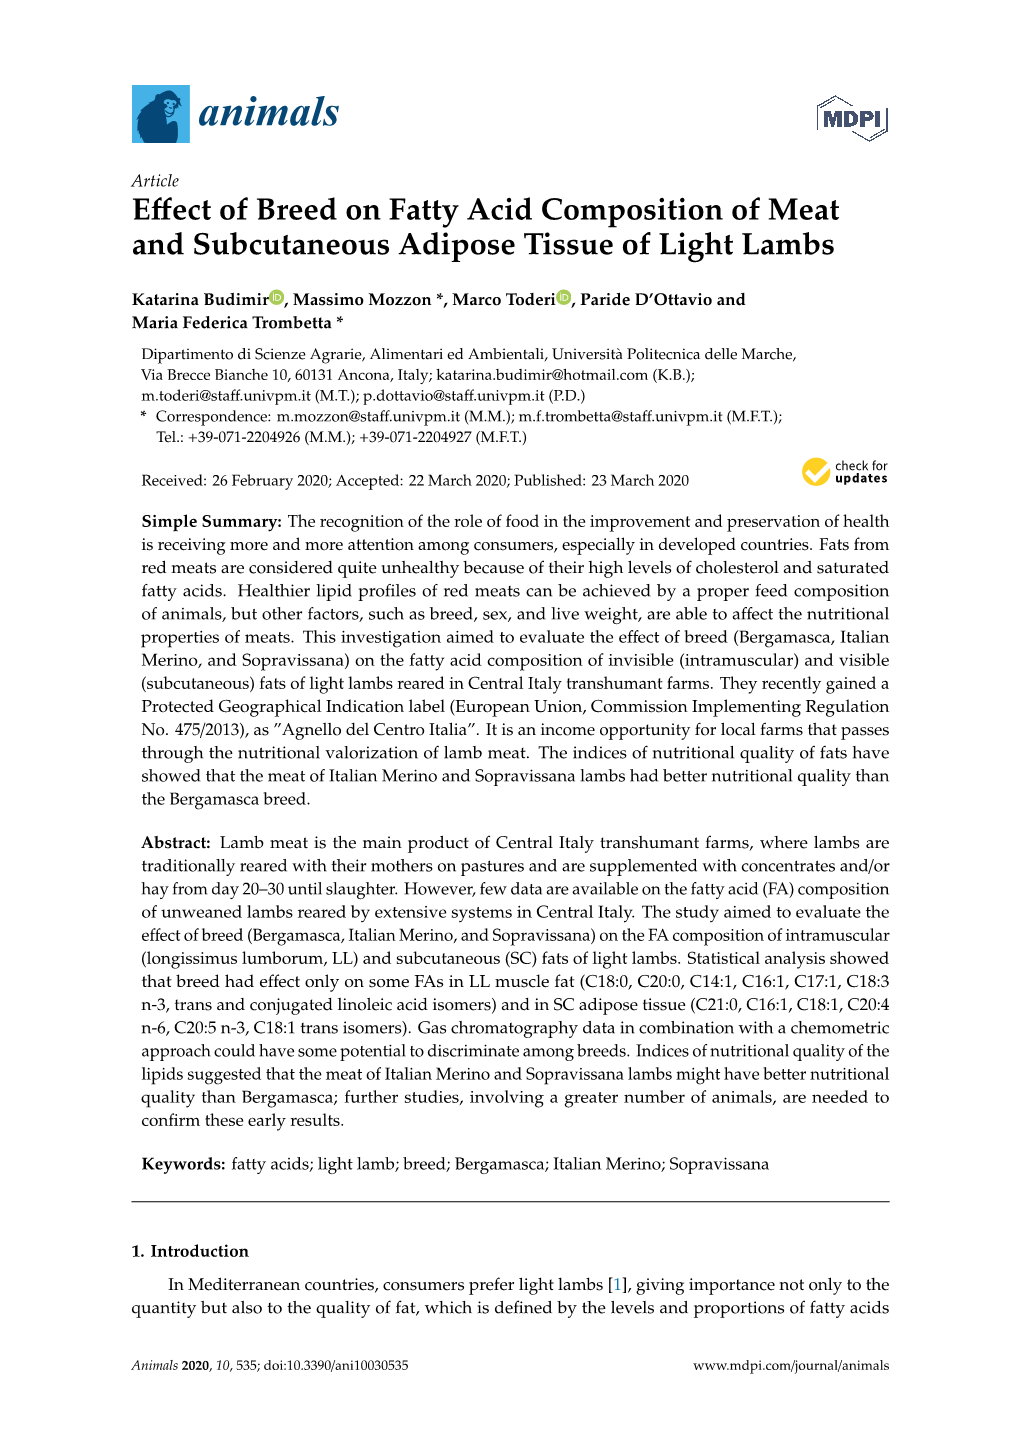 Effect of Breed on Fatty Acid Composition of Meat and Subcutaneous Adipose Tissue of Light Lambs